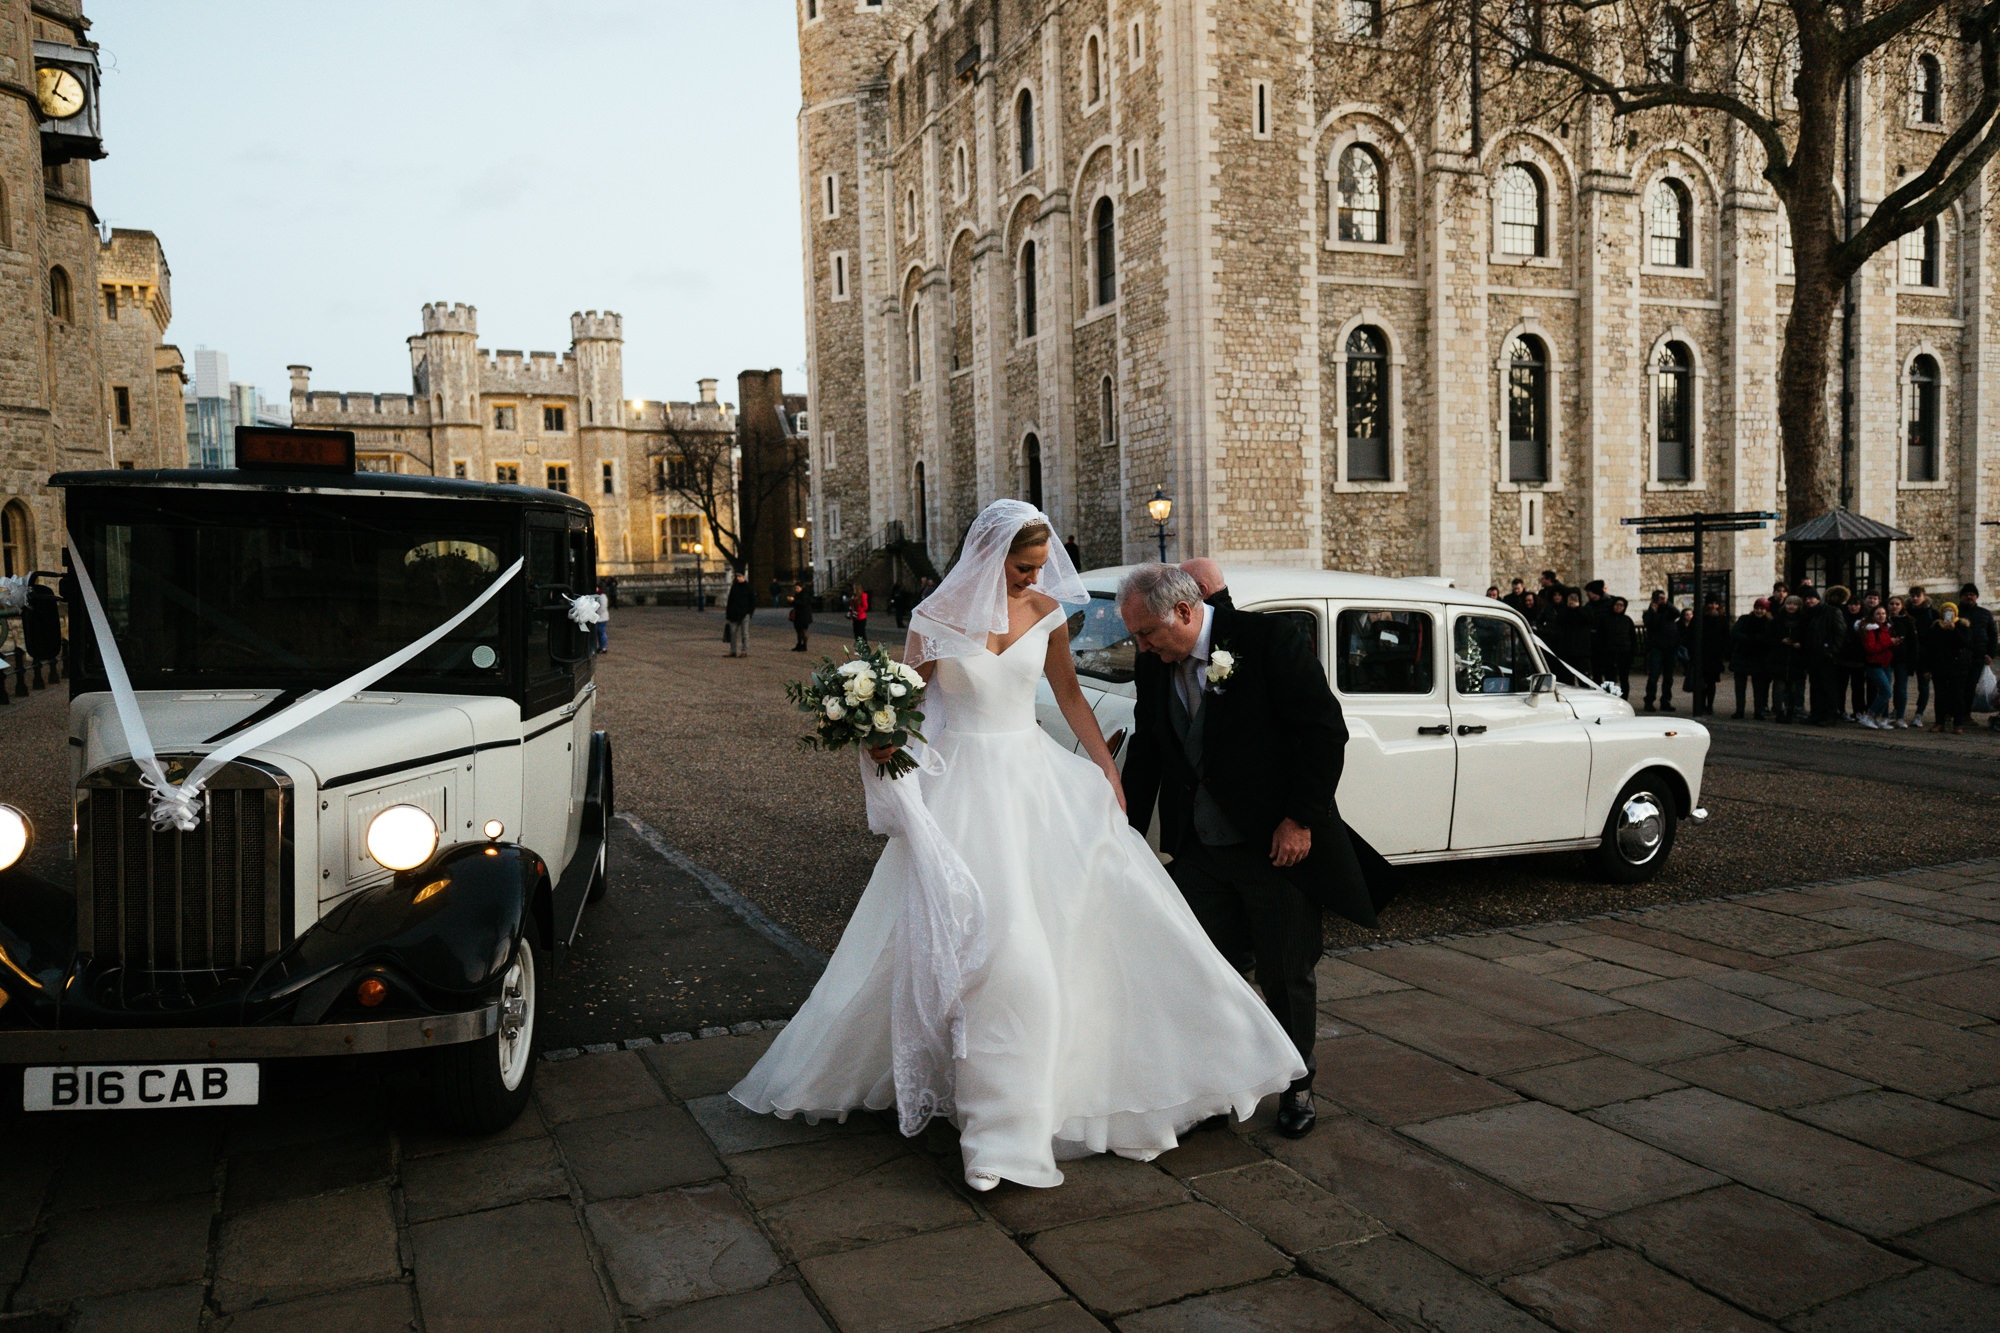 Chapel of St Peter ad Vincula at the Tower of London wedding car